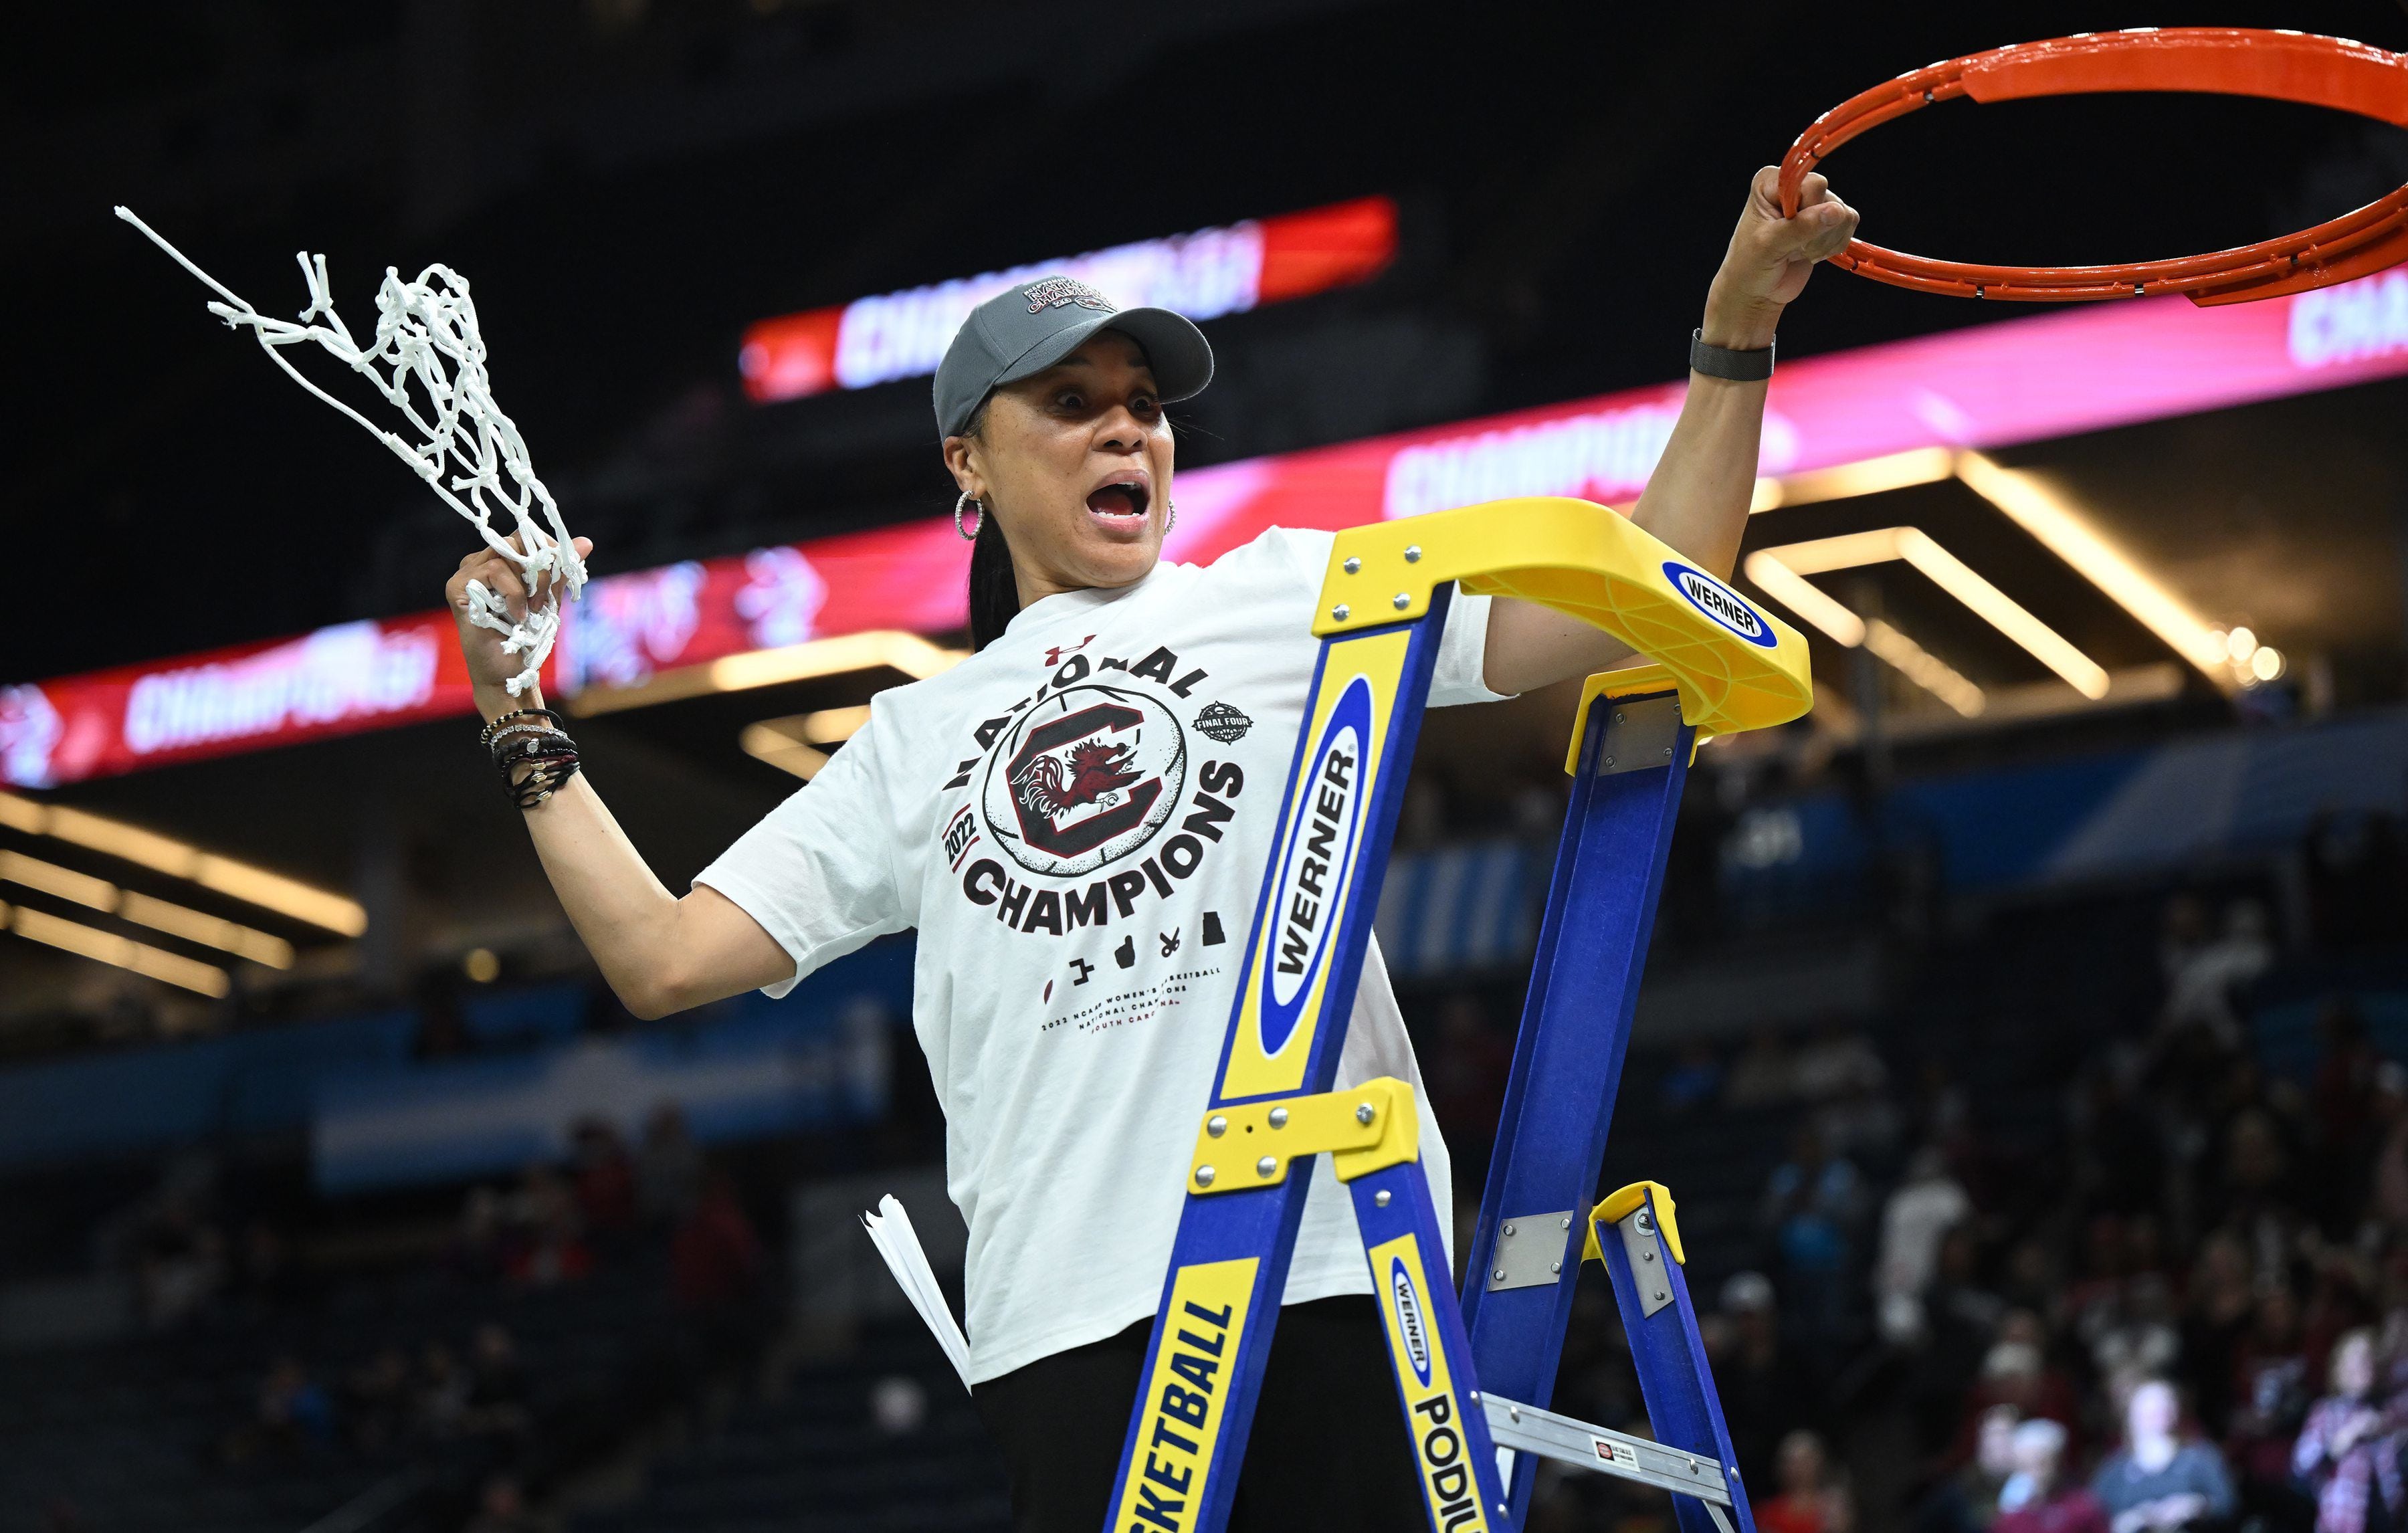 Dawn Staley: A petite package of dynamite, Sports